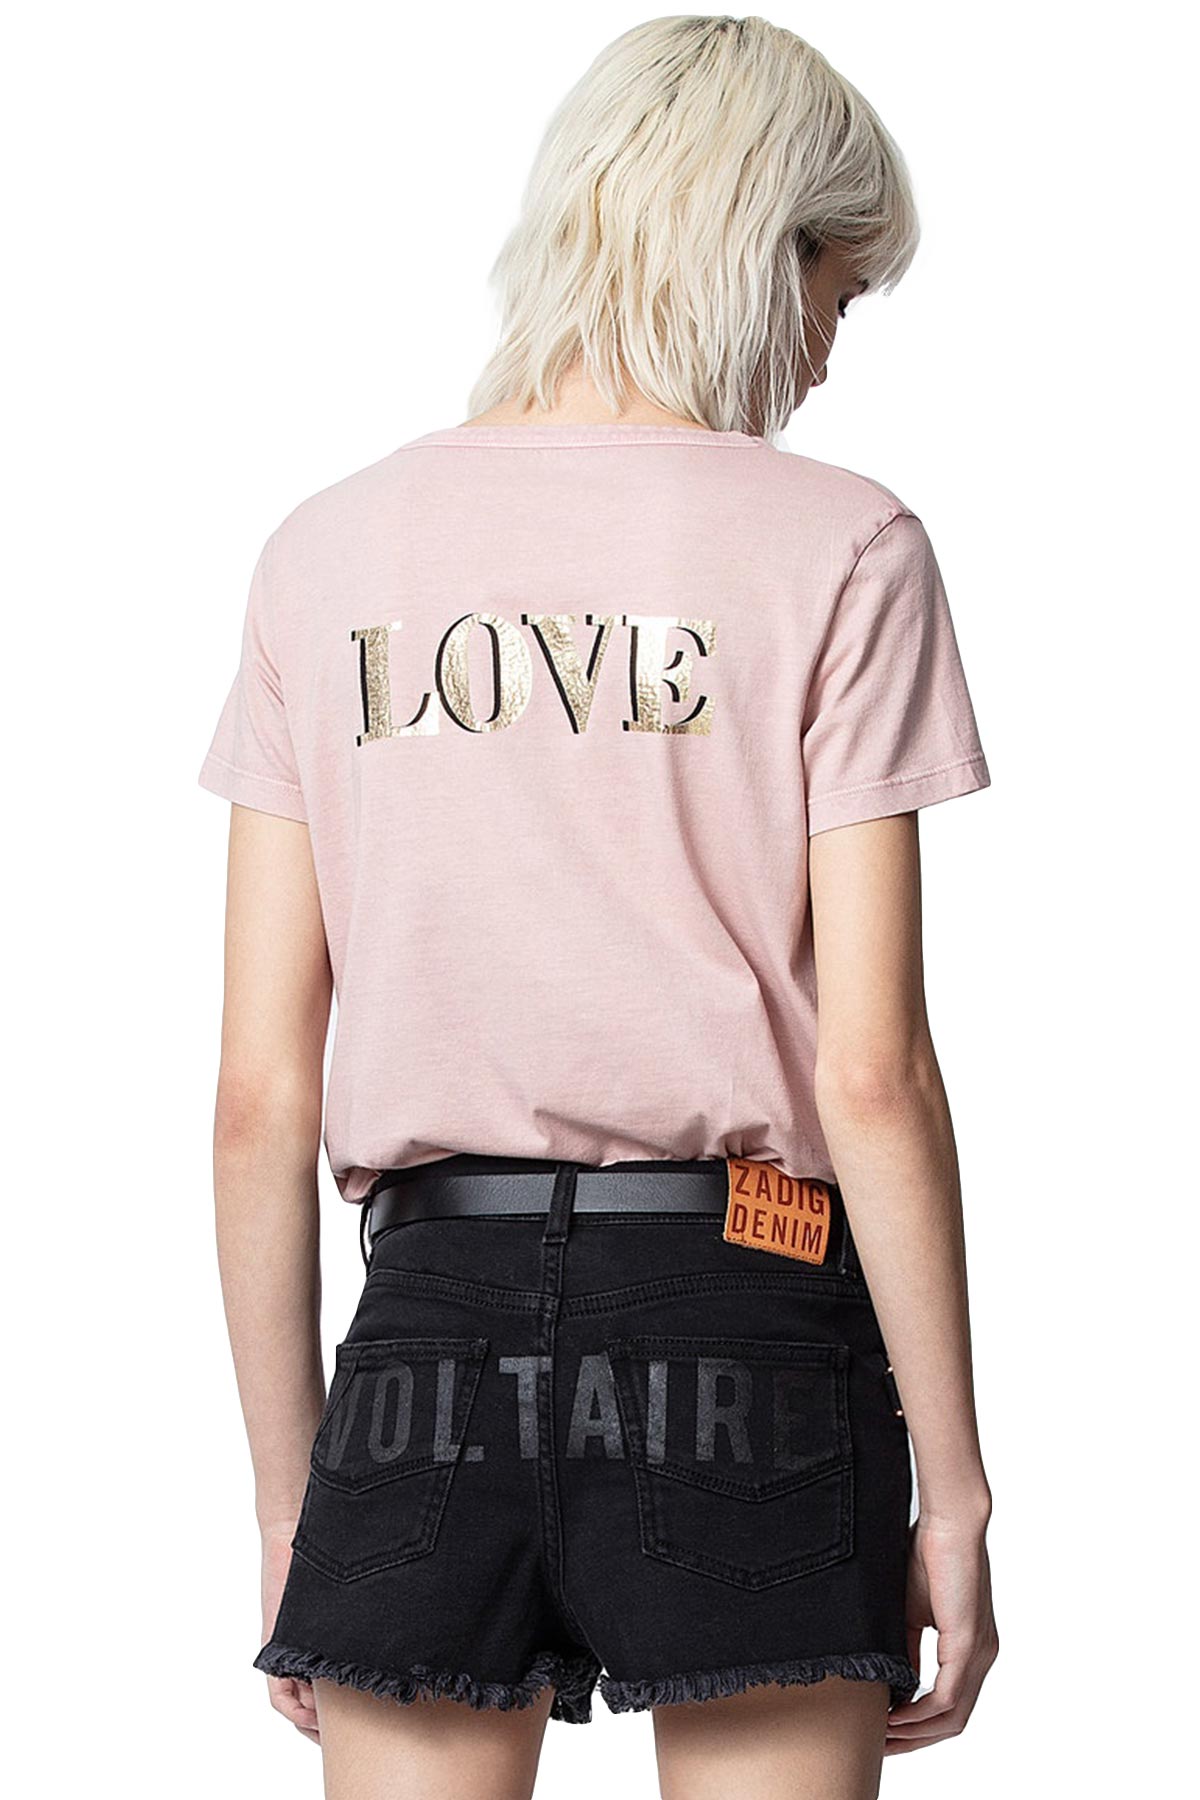 Zadig & Voltaire Love T-shirt-Libas Trendy Fashion Store